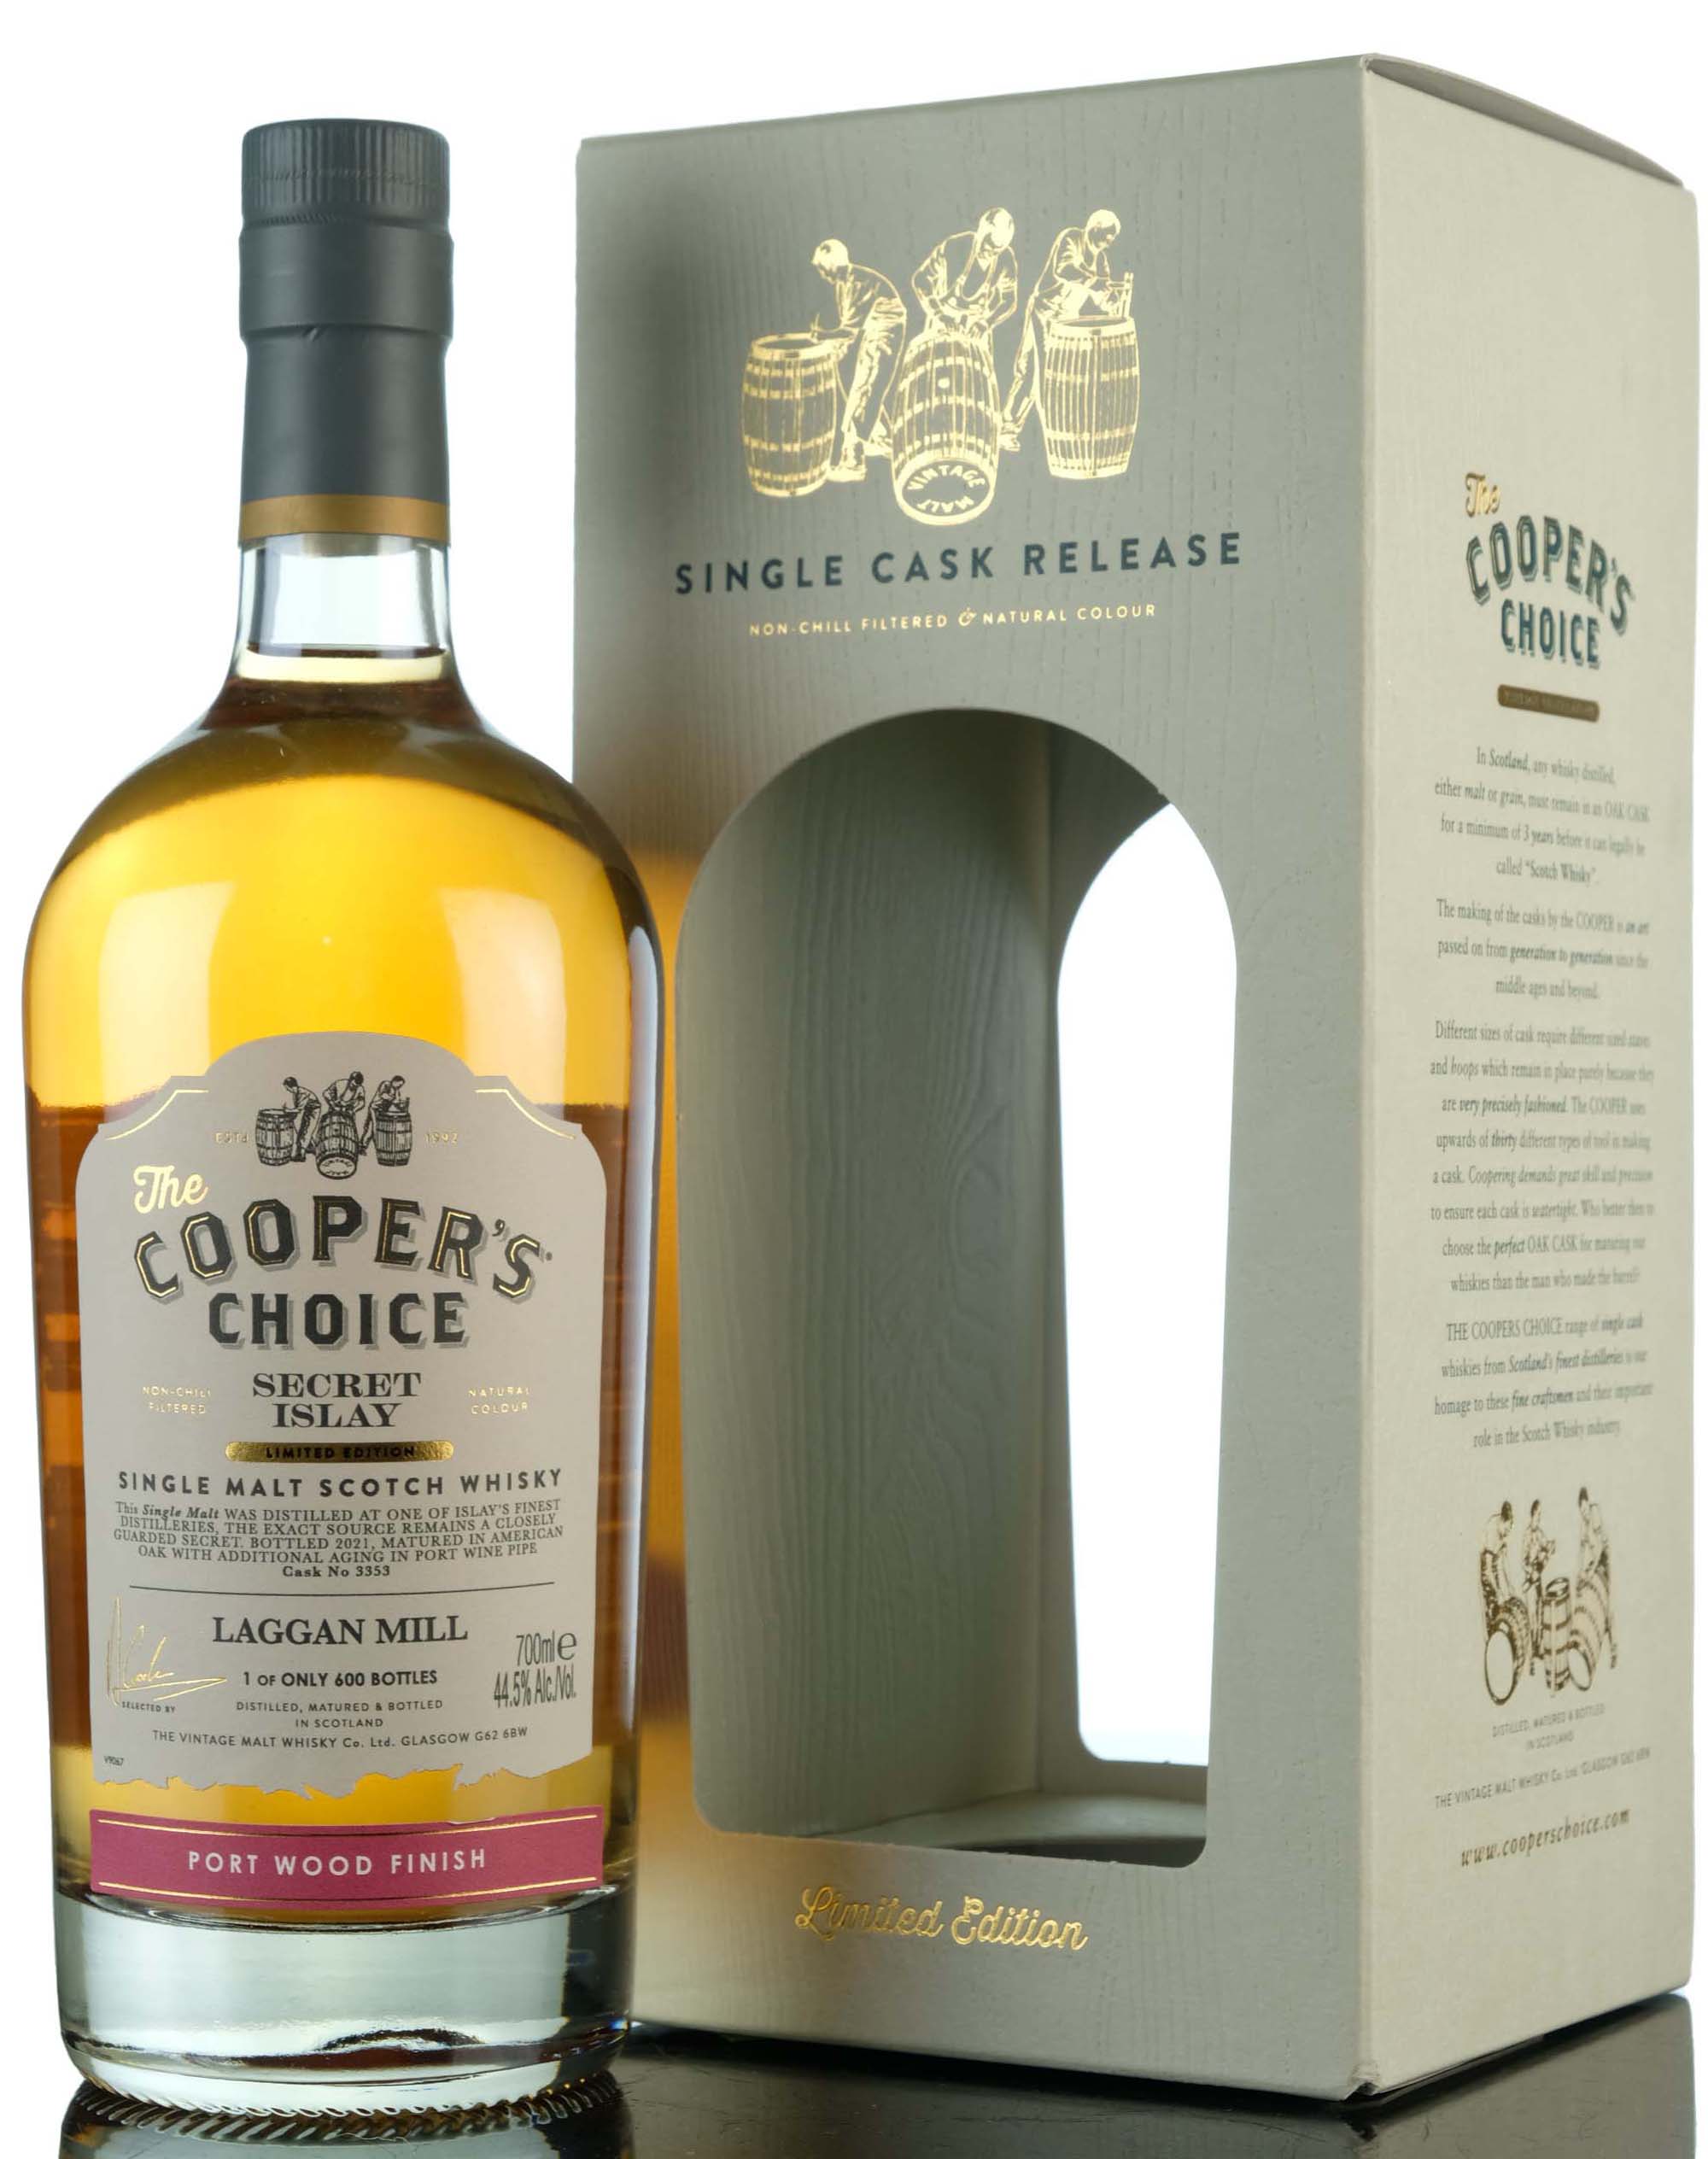 Laggan Mill Secret Islay - Coopers Choice - Single Cask 3353 - 2021 Release